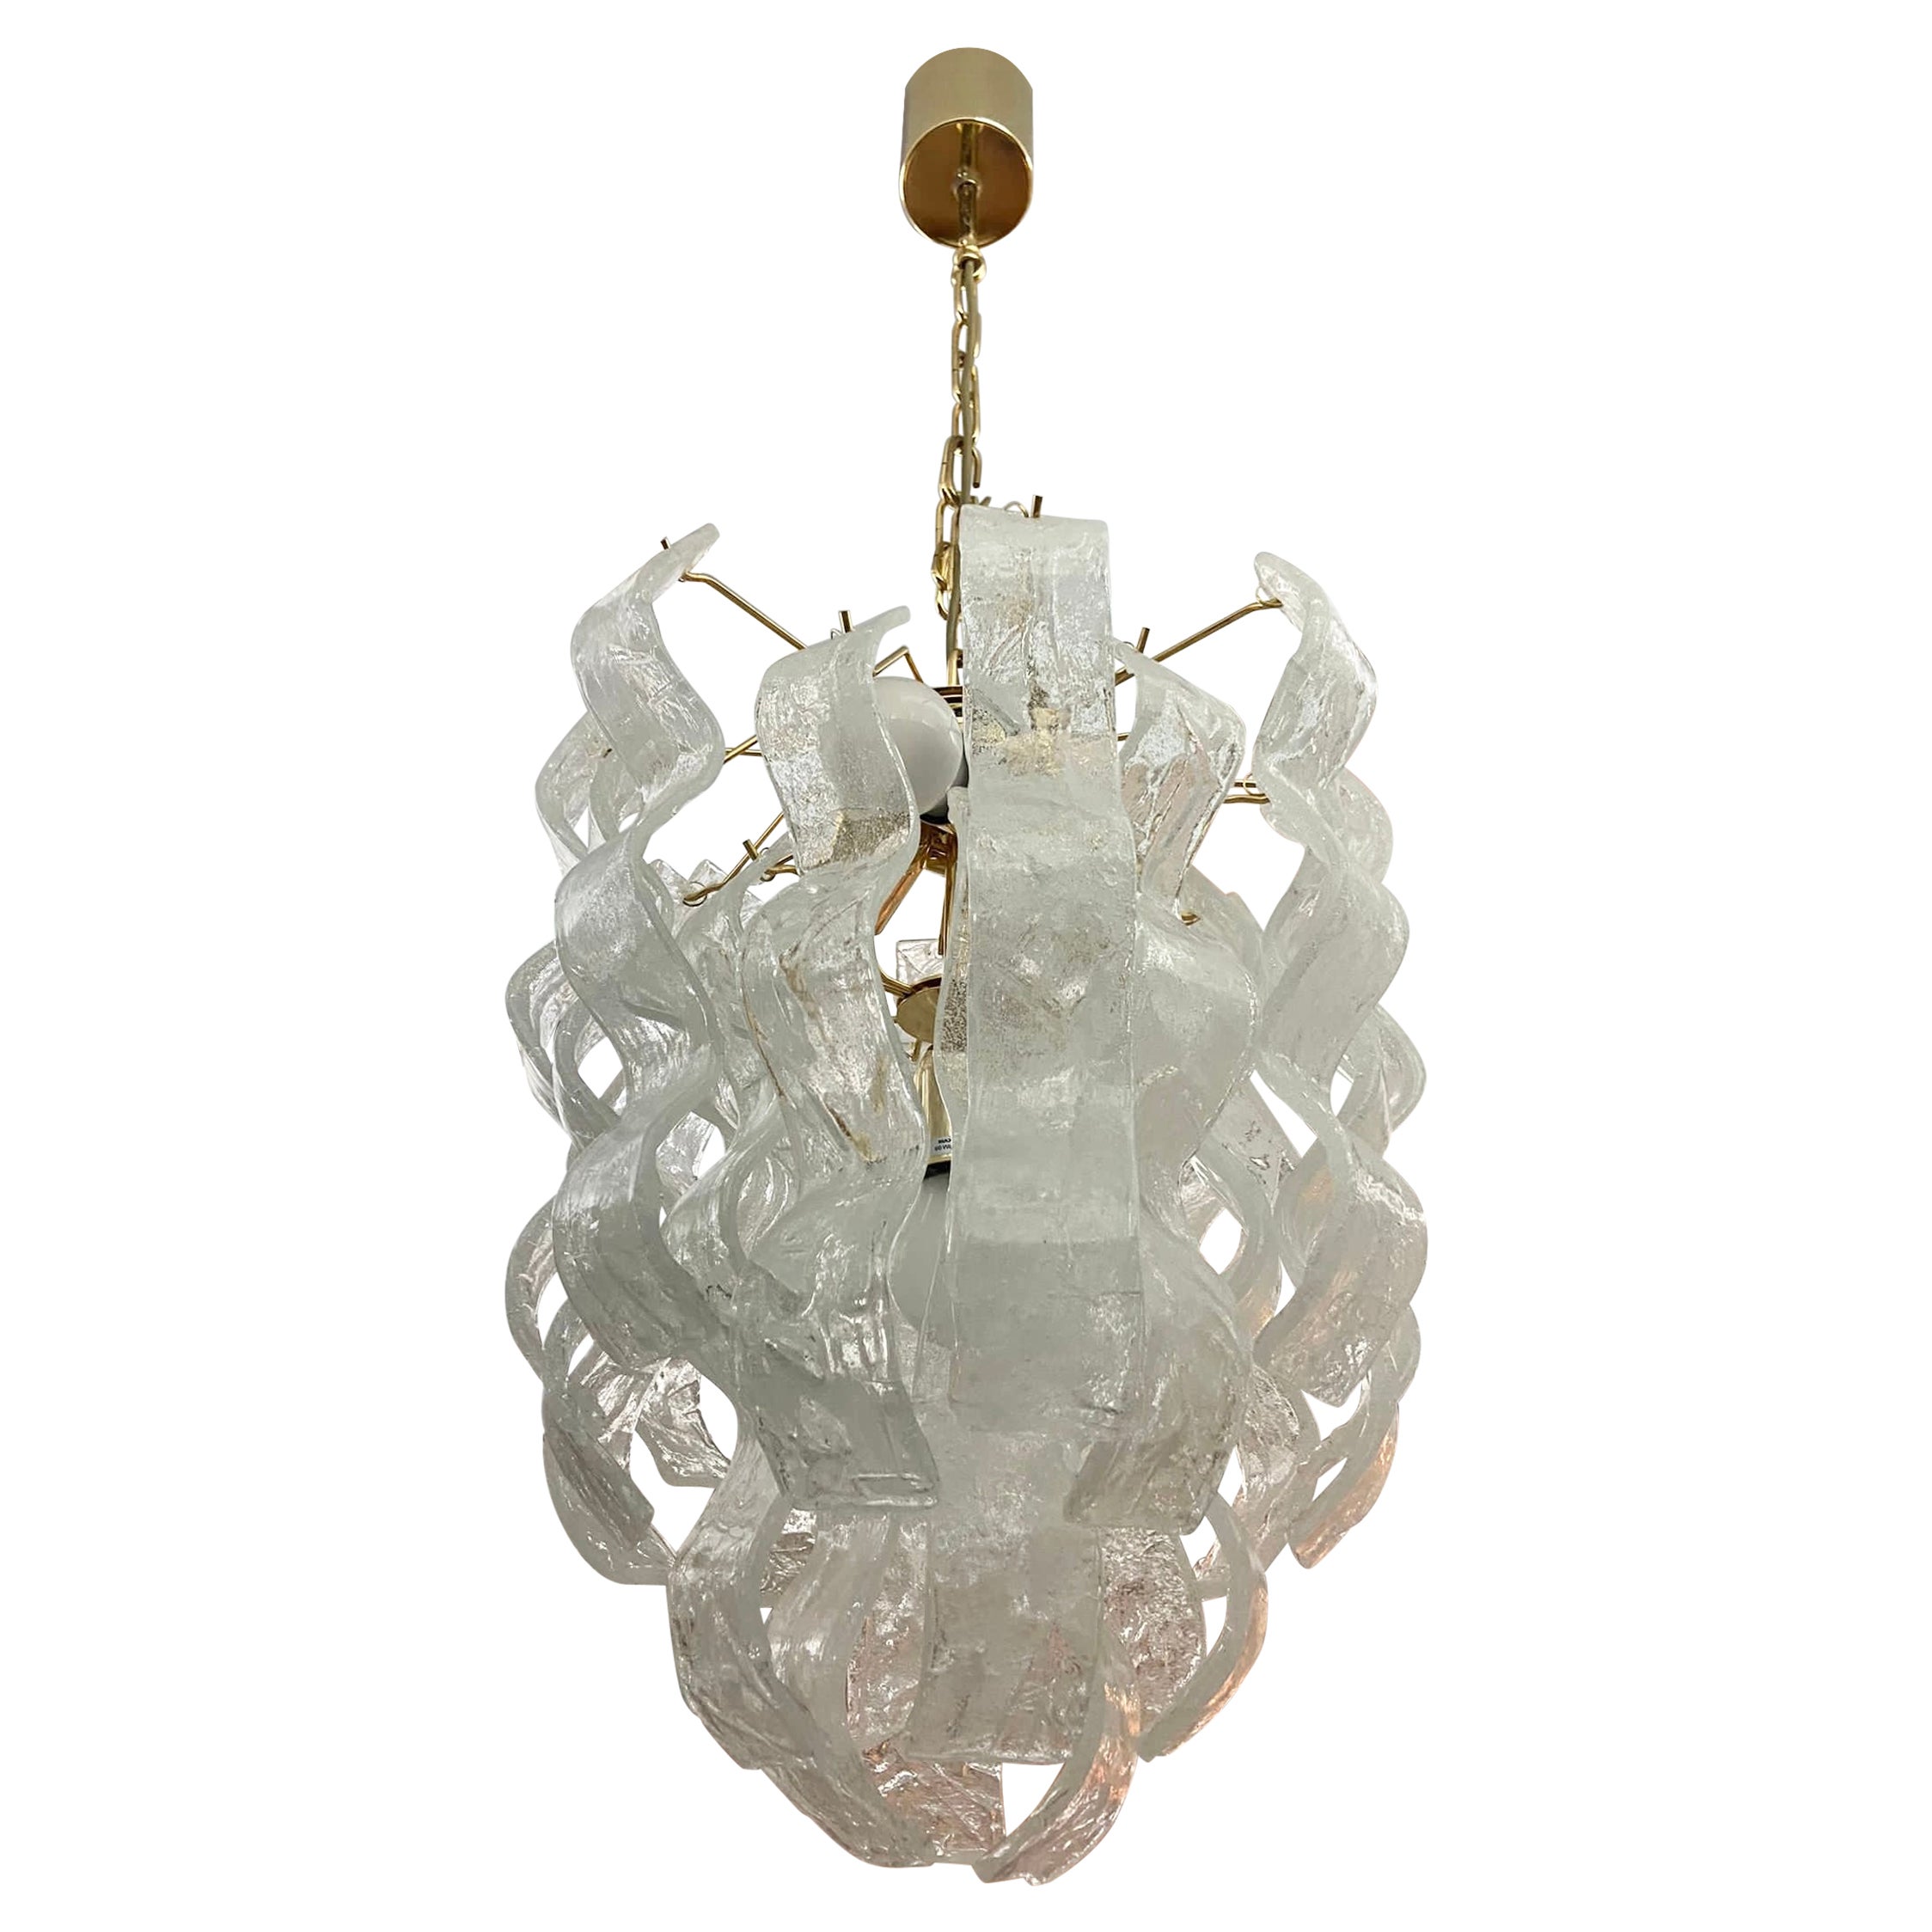 1970s Mid-Century Modern White Murano Glass Cascade Chandelier by Mazzega For Sale